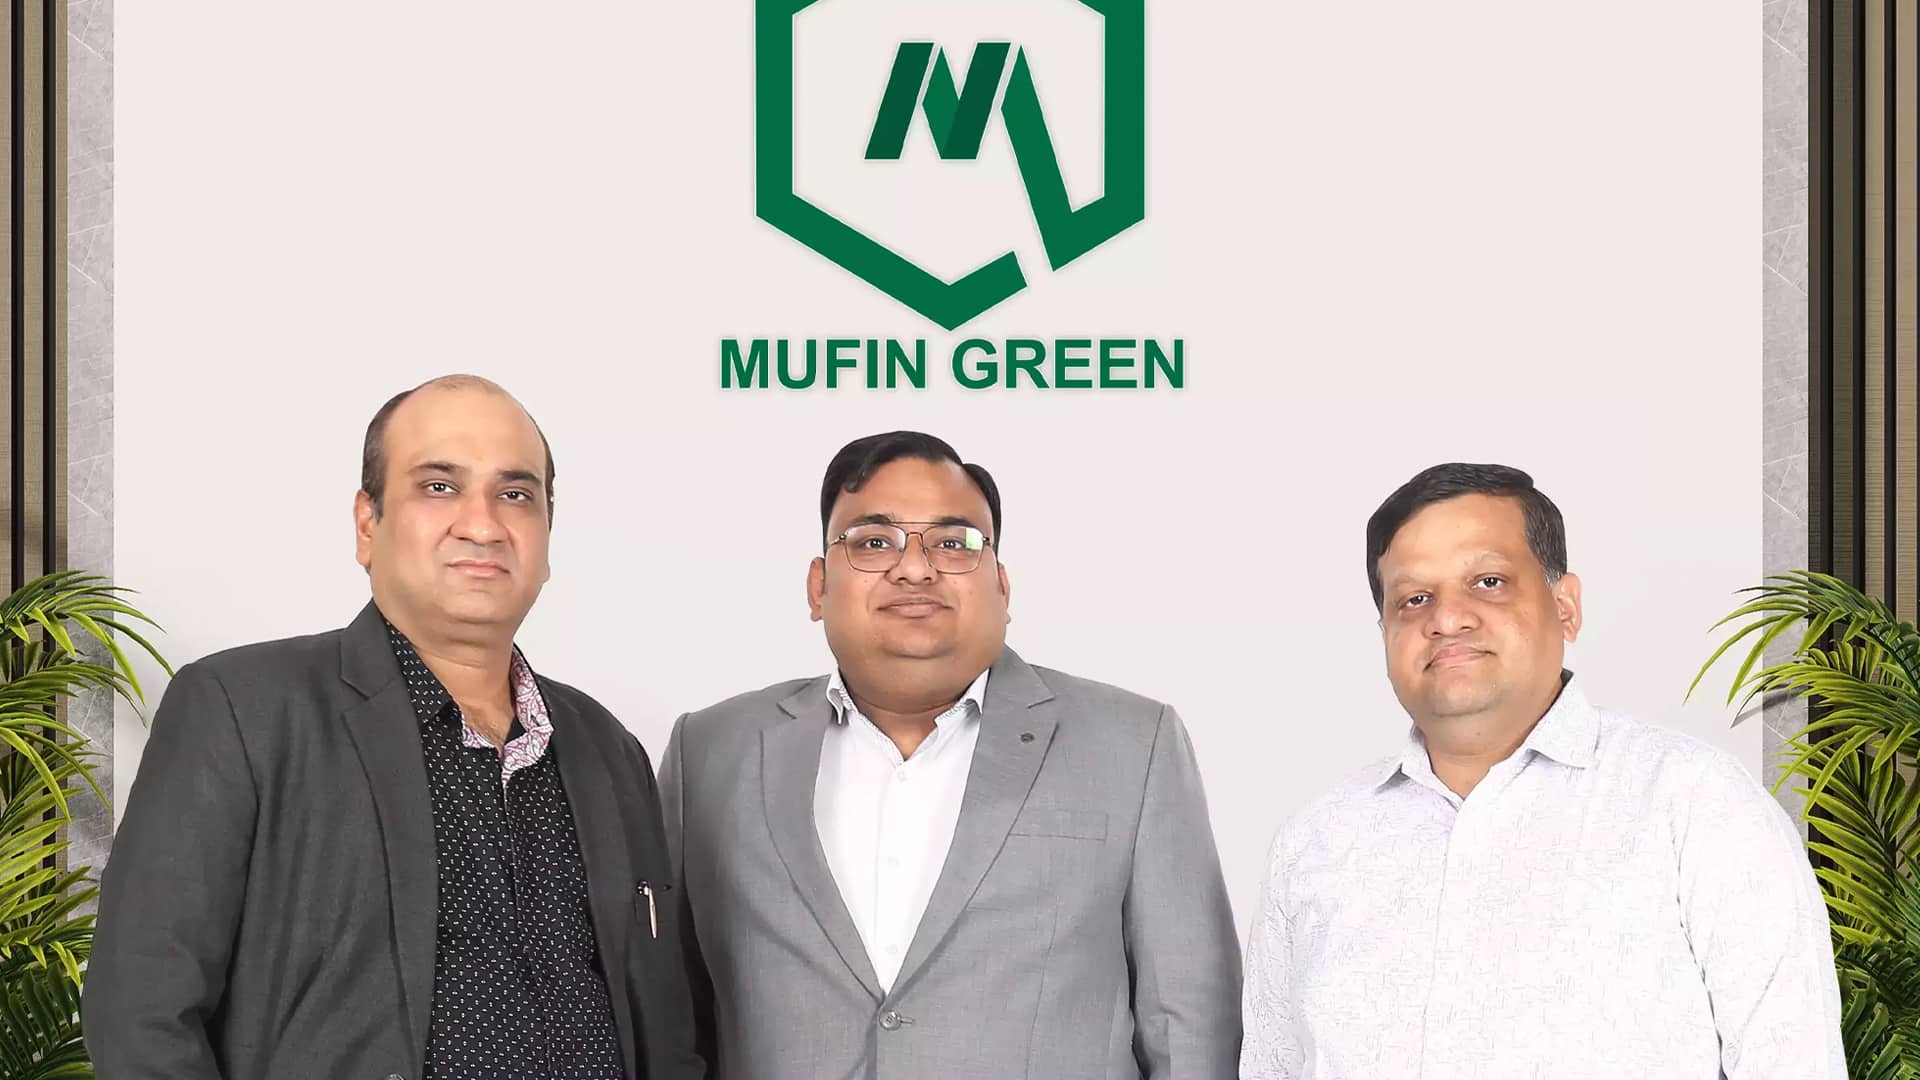 Electric vehicle financing firm Mufin raises USD 7 million in green bond from Symbiotics Investments